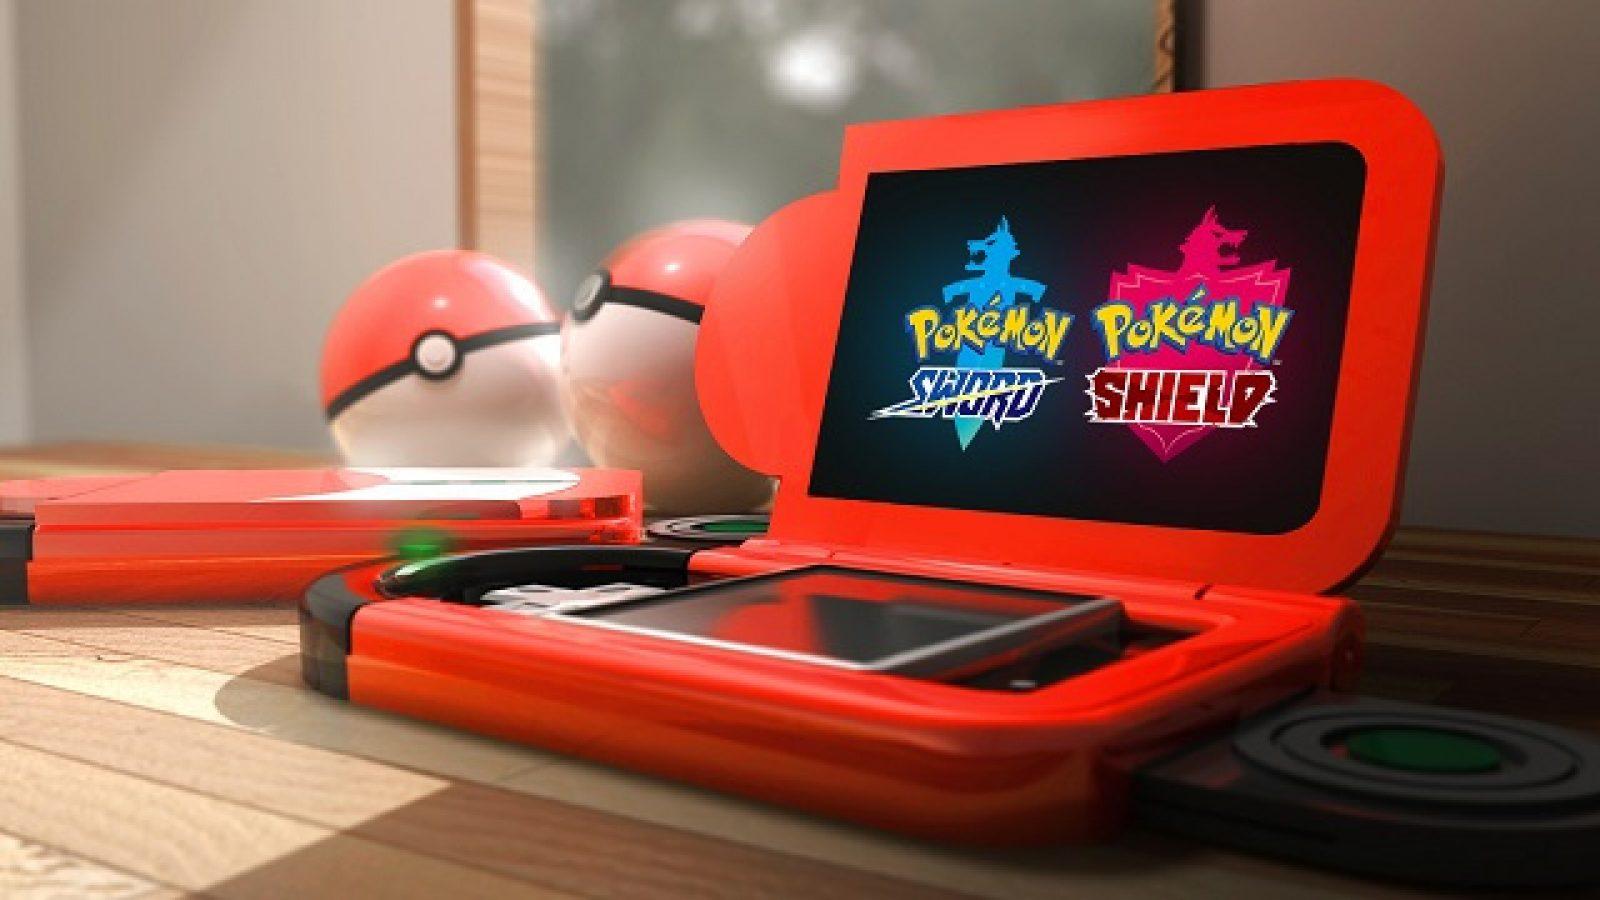 Pokemon in Sword and Shield Pokedex update following great news